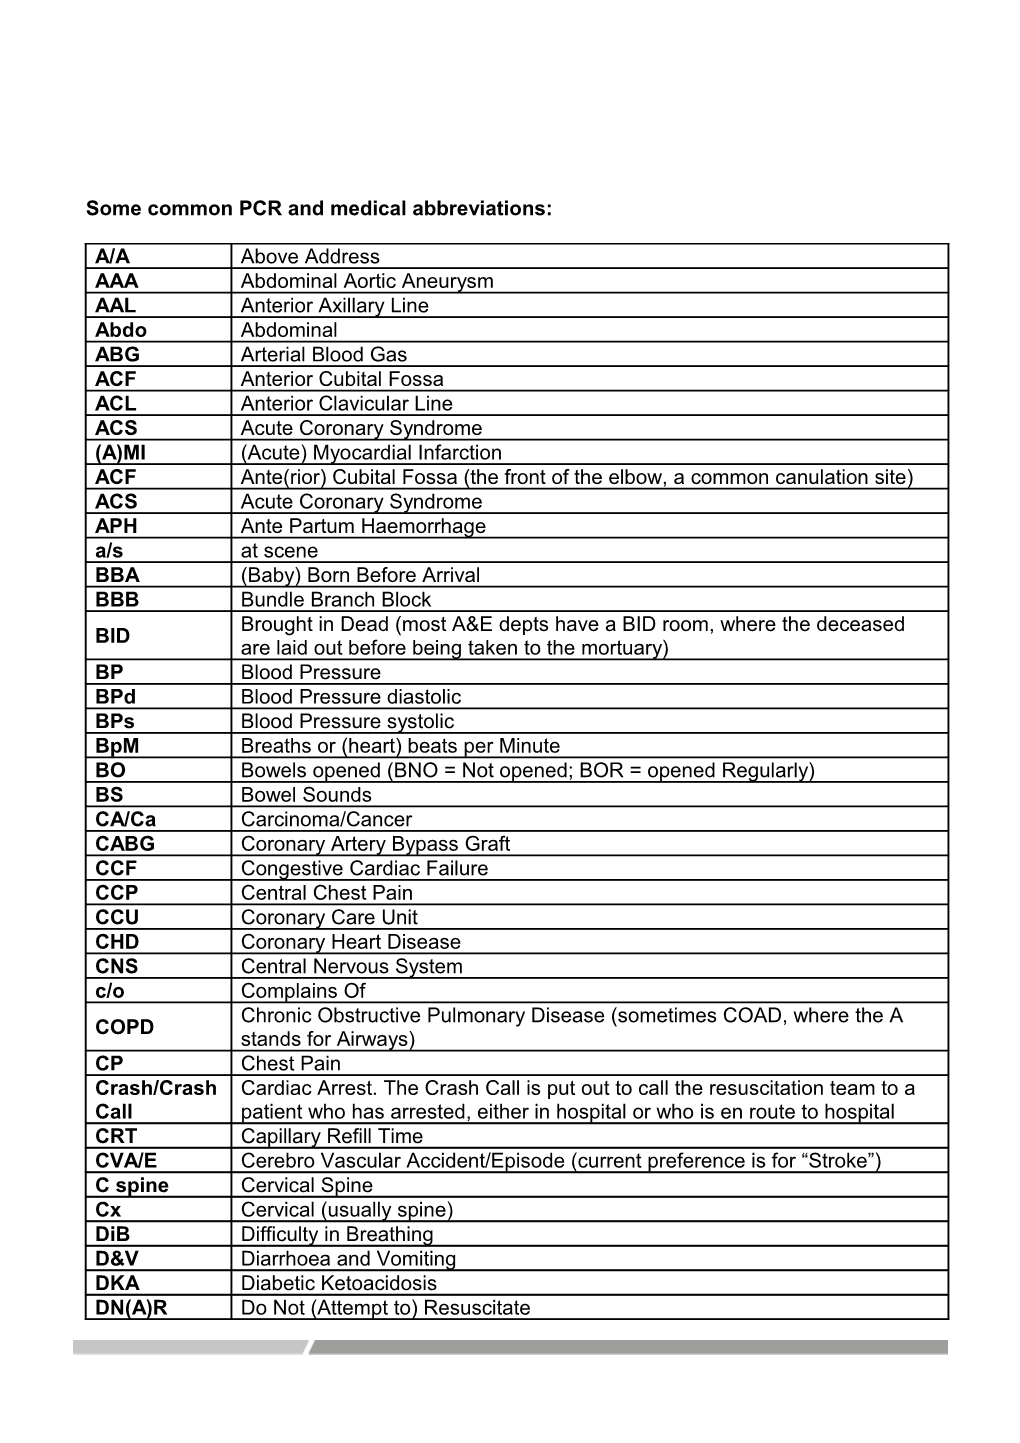 Some Common PCR and Medical Abbreviations